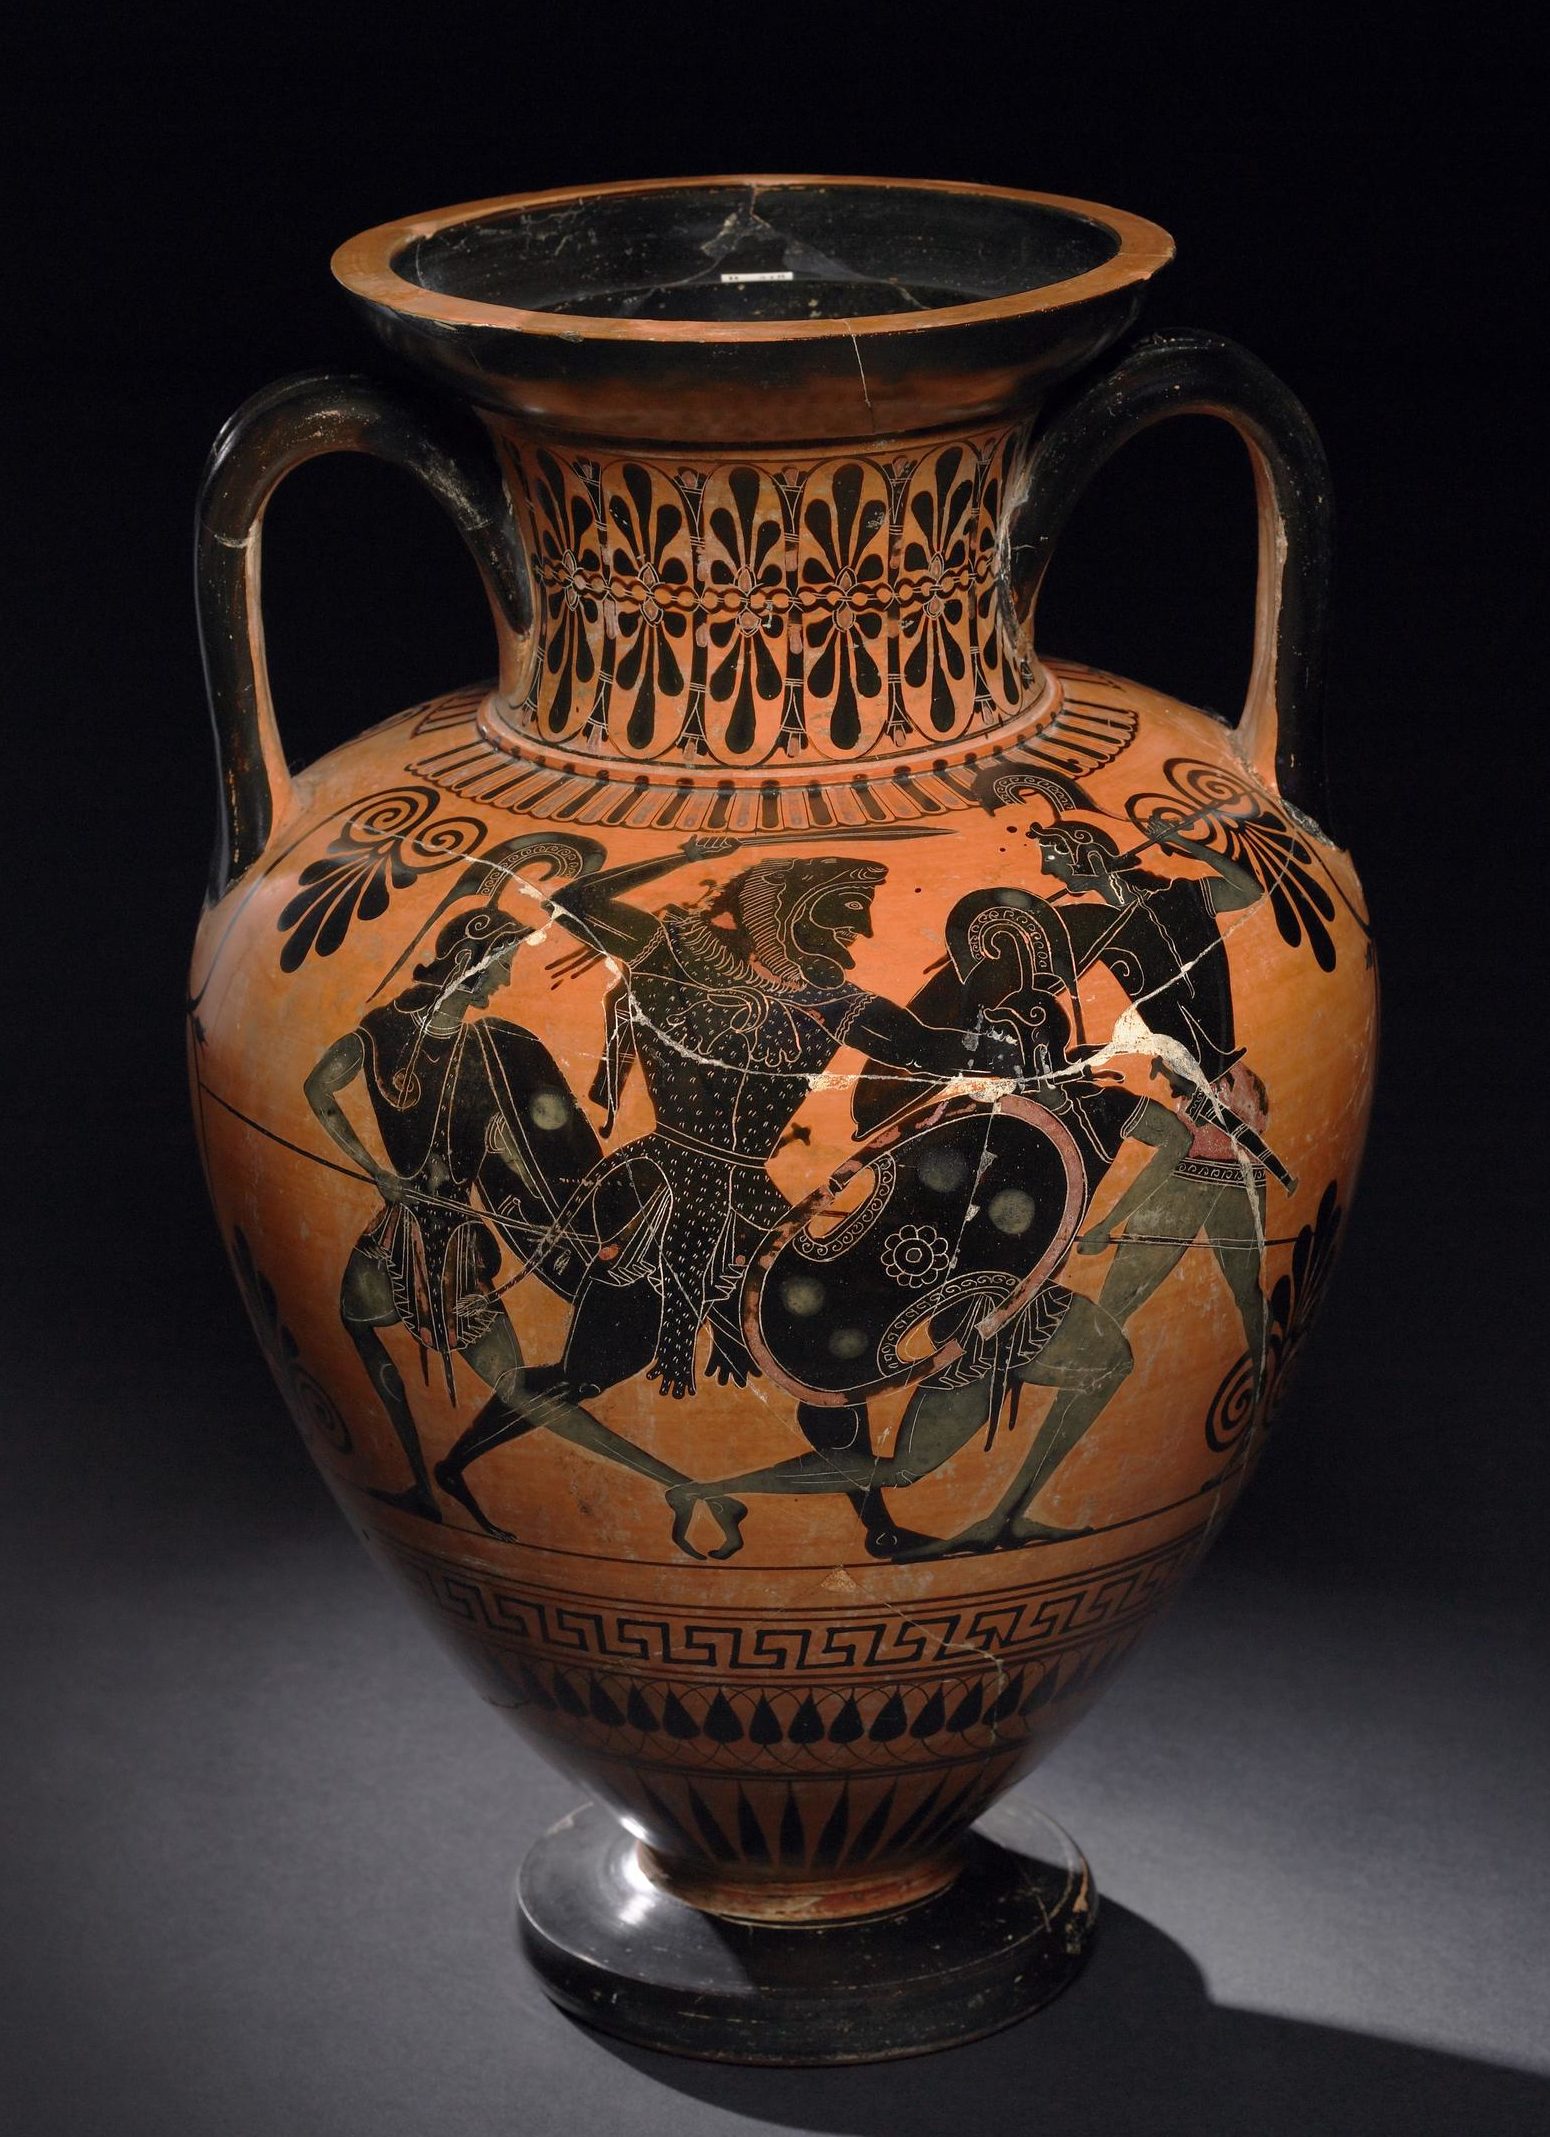 Heracles fighting 3 Amazons. He has his sword raised to strike on of them, who is on one knee, while the other two lunge in towards him with spears.